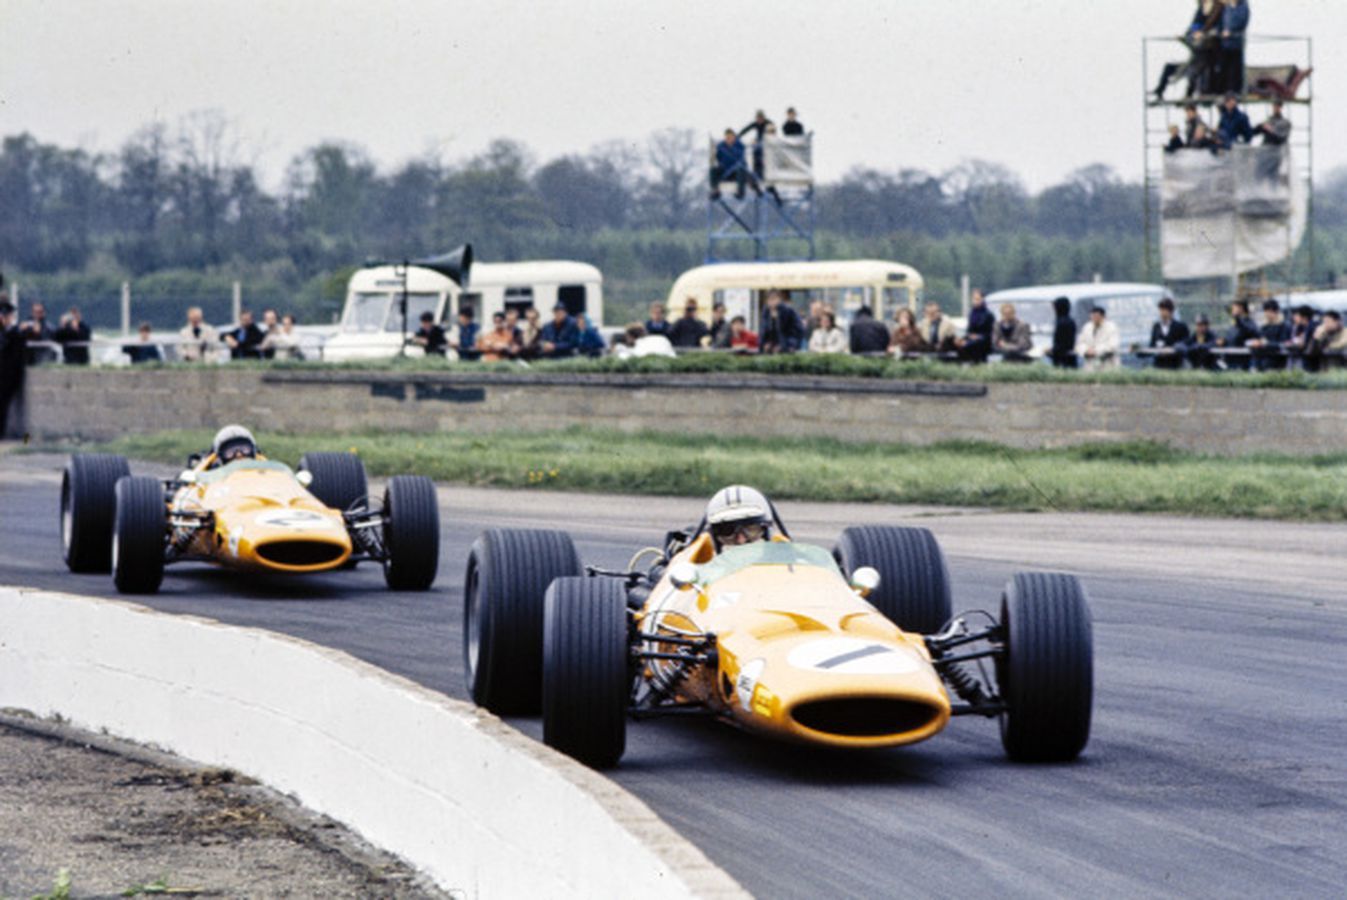 Denny Hulme beat Bruce McLaren to victory in the 1968